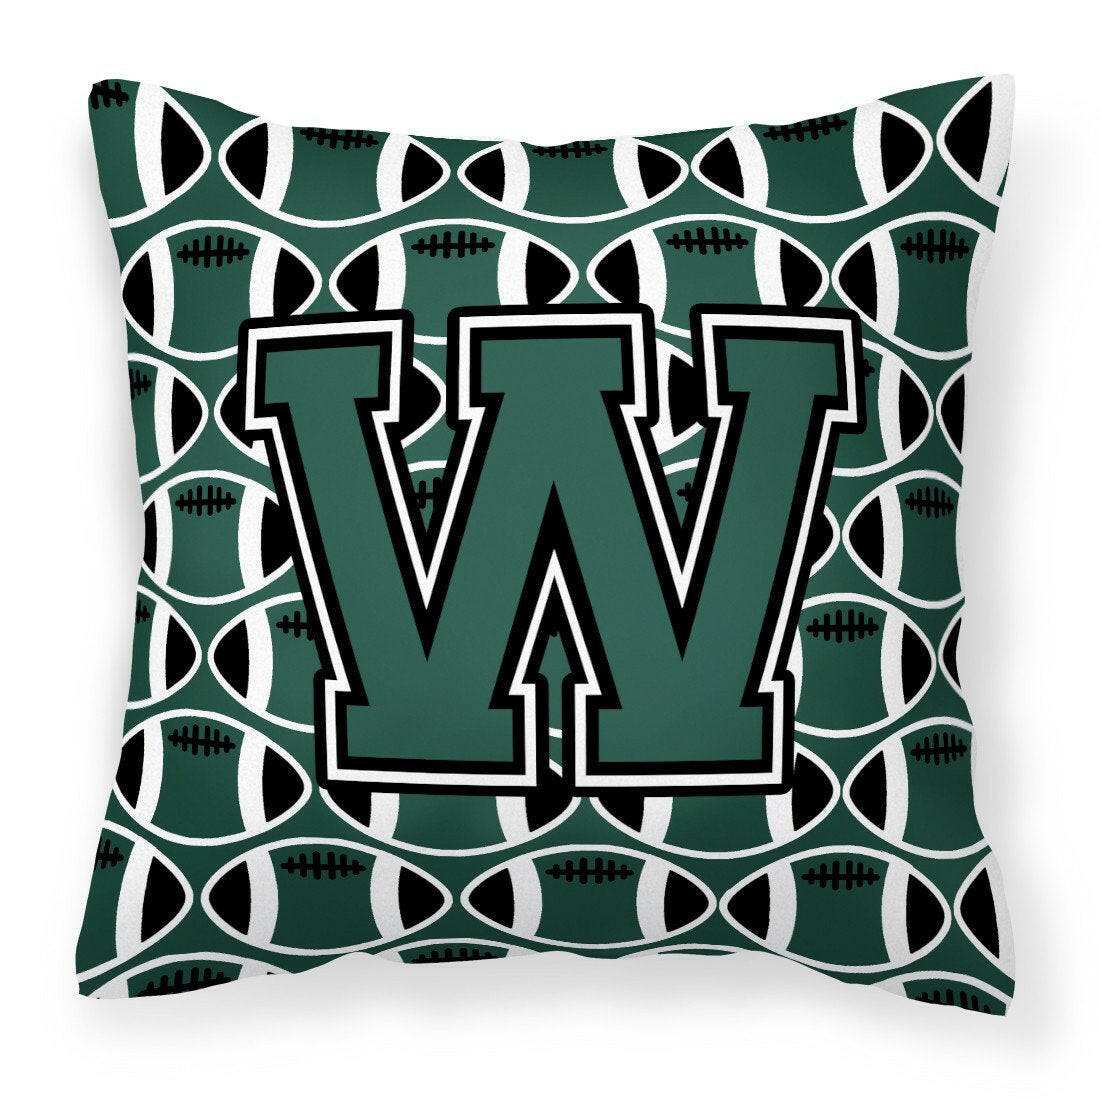 Letter W Football Green and White Fabric Decorative Pillow CJ1071-WPW1414 by Caroline's Treasures